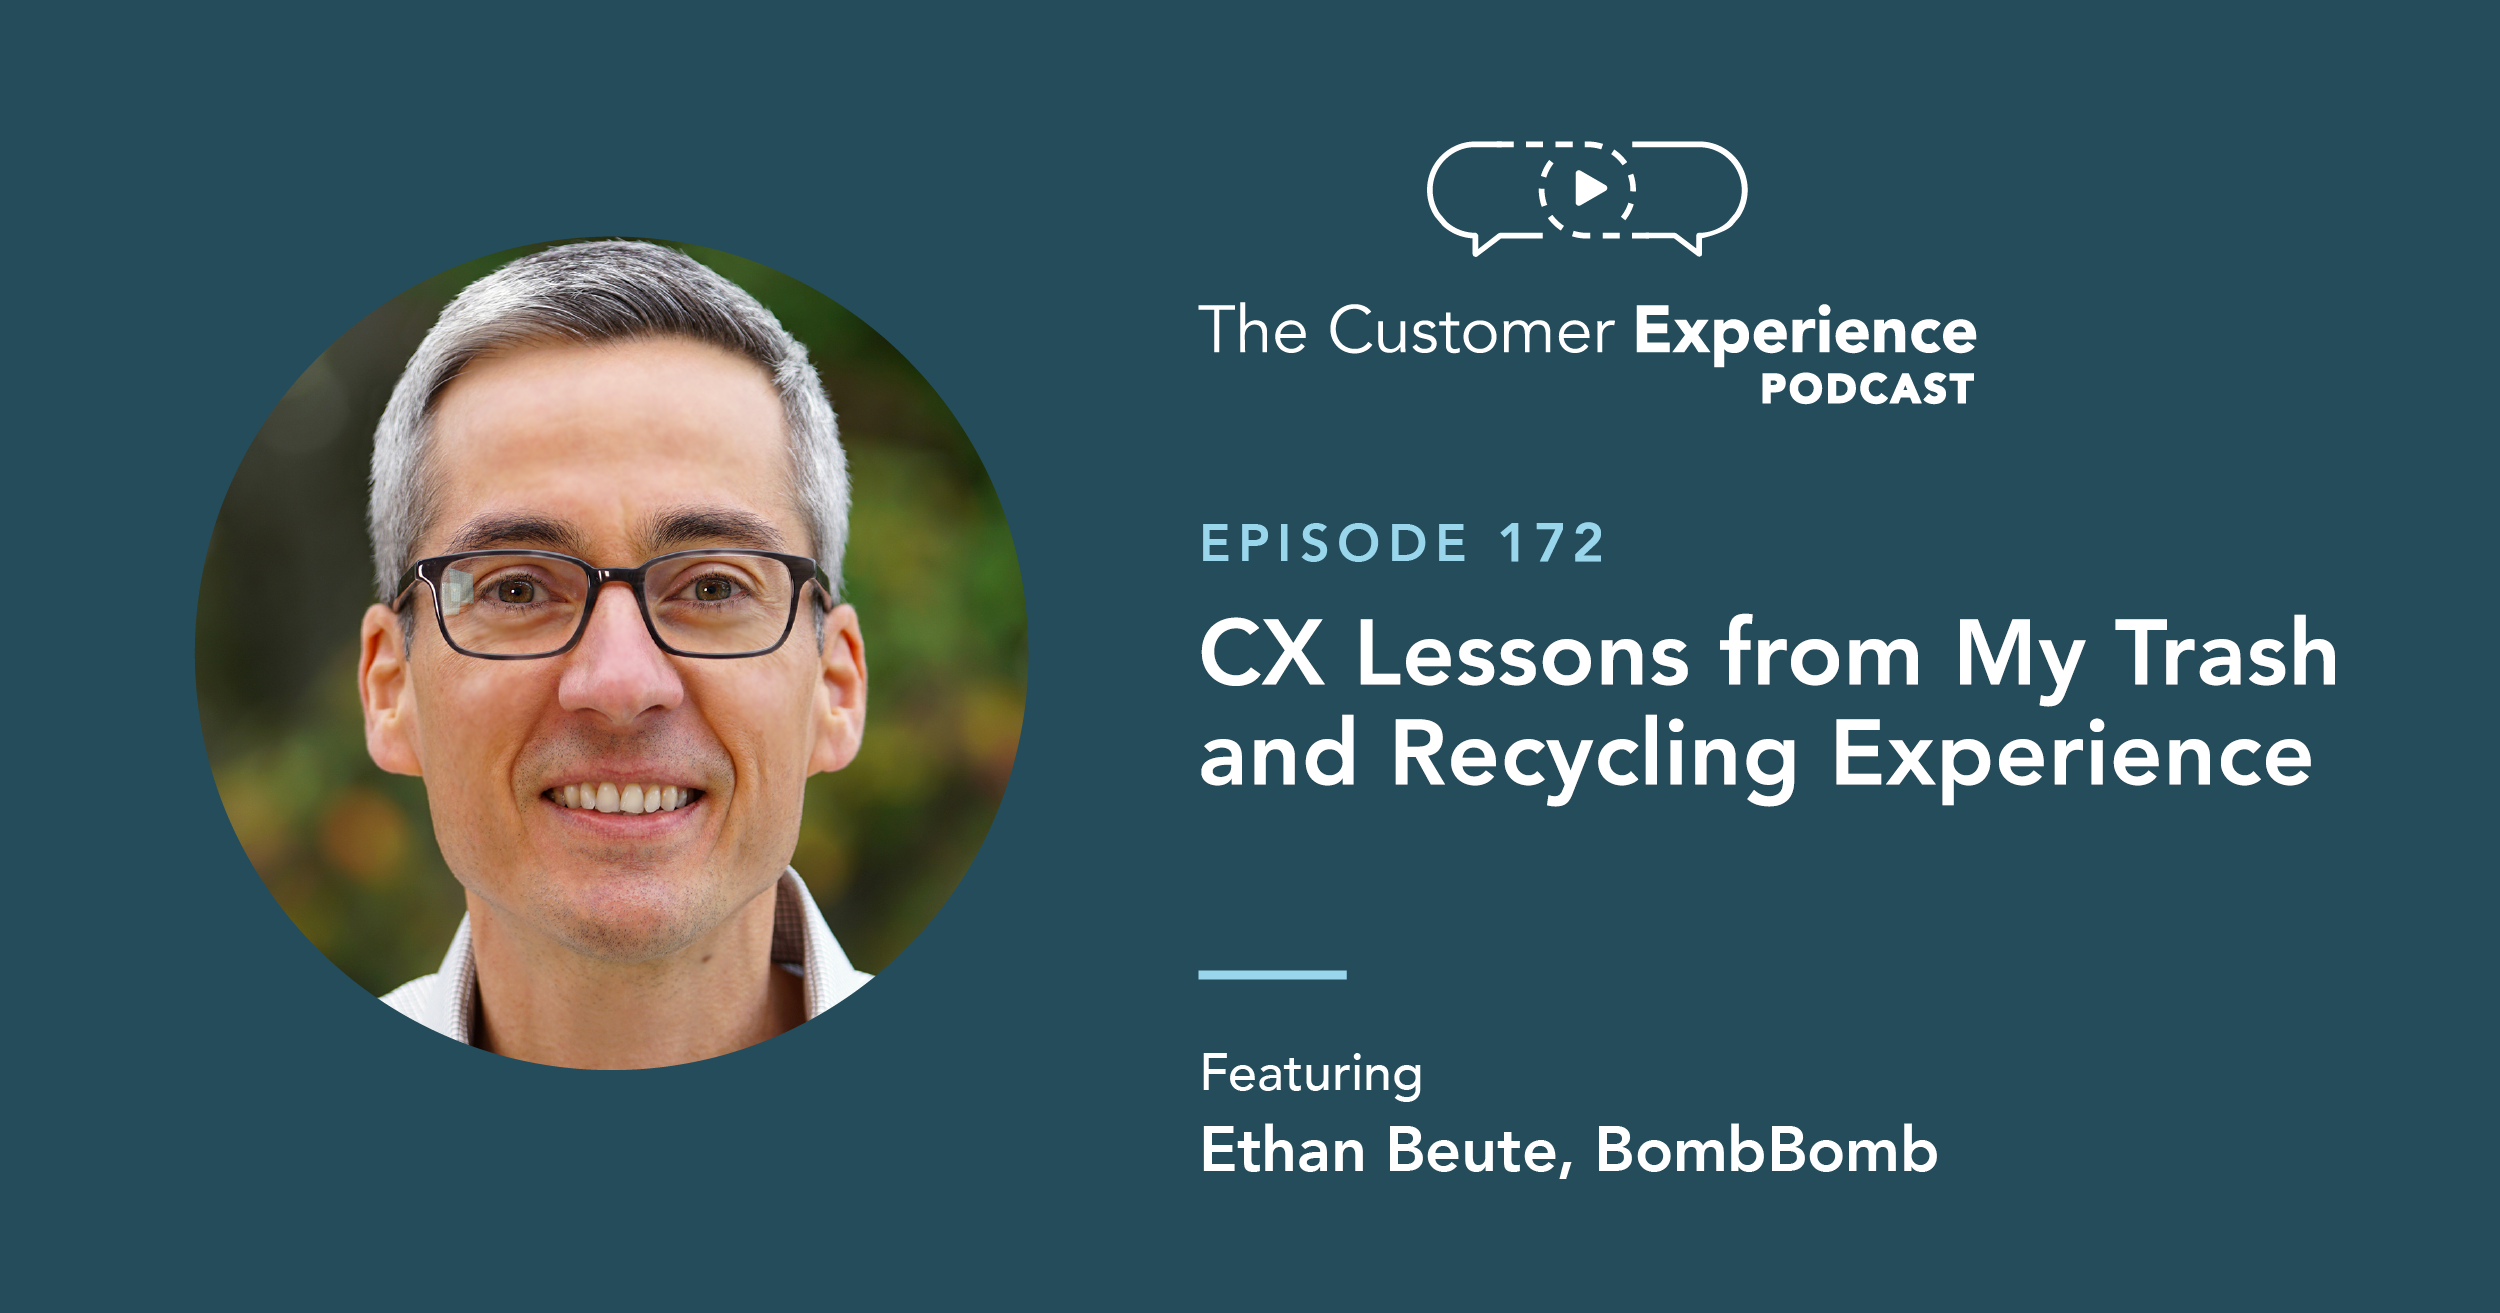 Ethan Beute, BombBomb, The Customer Experience Podcast, trash and recycling, trash service, waste removal, recycling service, customer service, customer service story, Colorado Springs, Colorado, Waste Connections, Springs Waste Systems